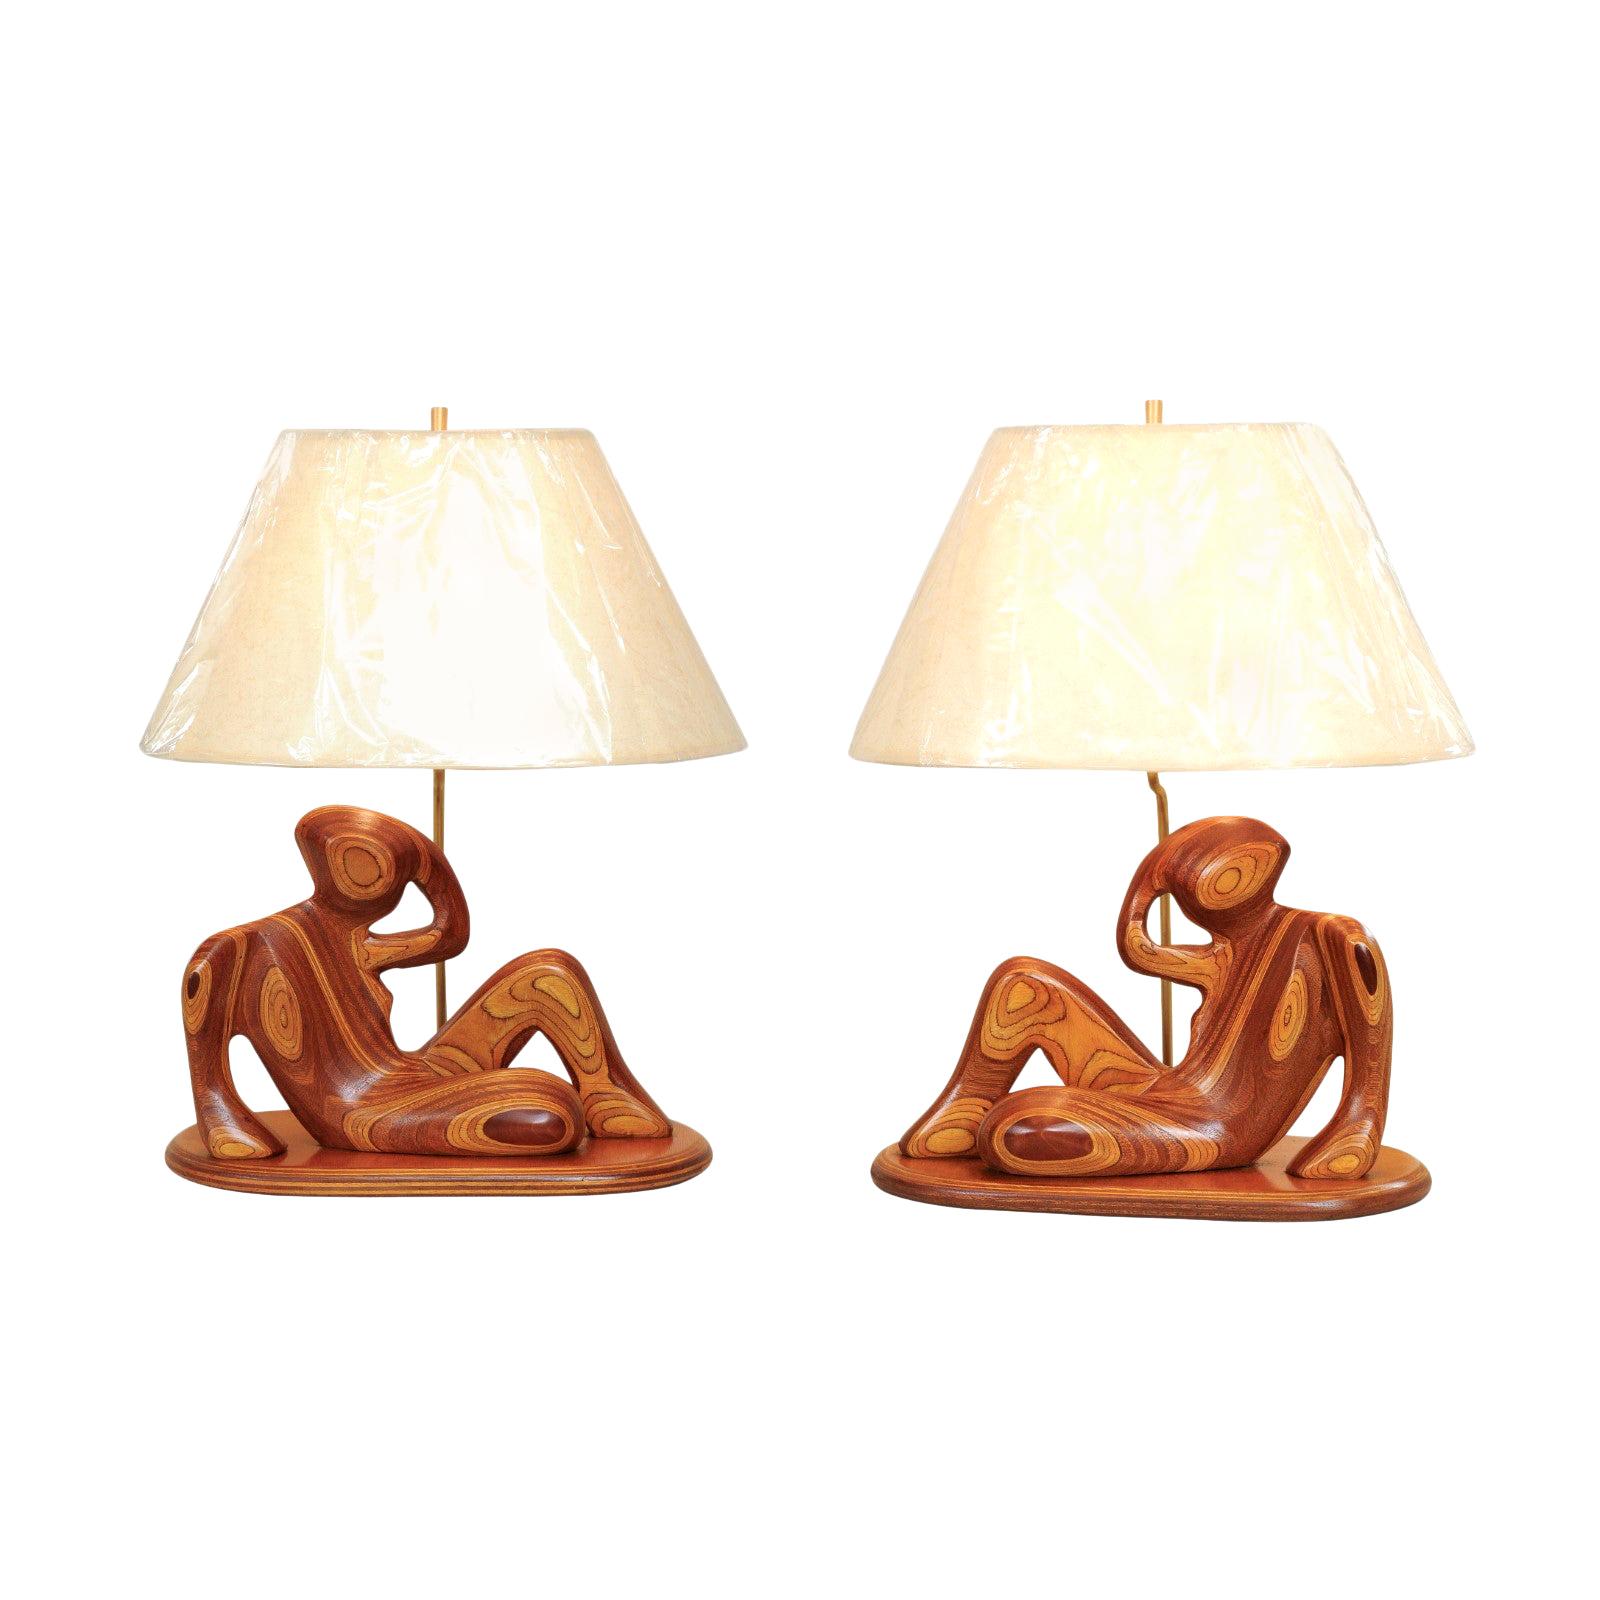  Breathtaking Pair of Birch and Mahogany Sculptures as Lamps, circa 1985 For Sale